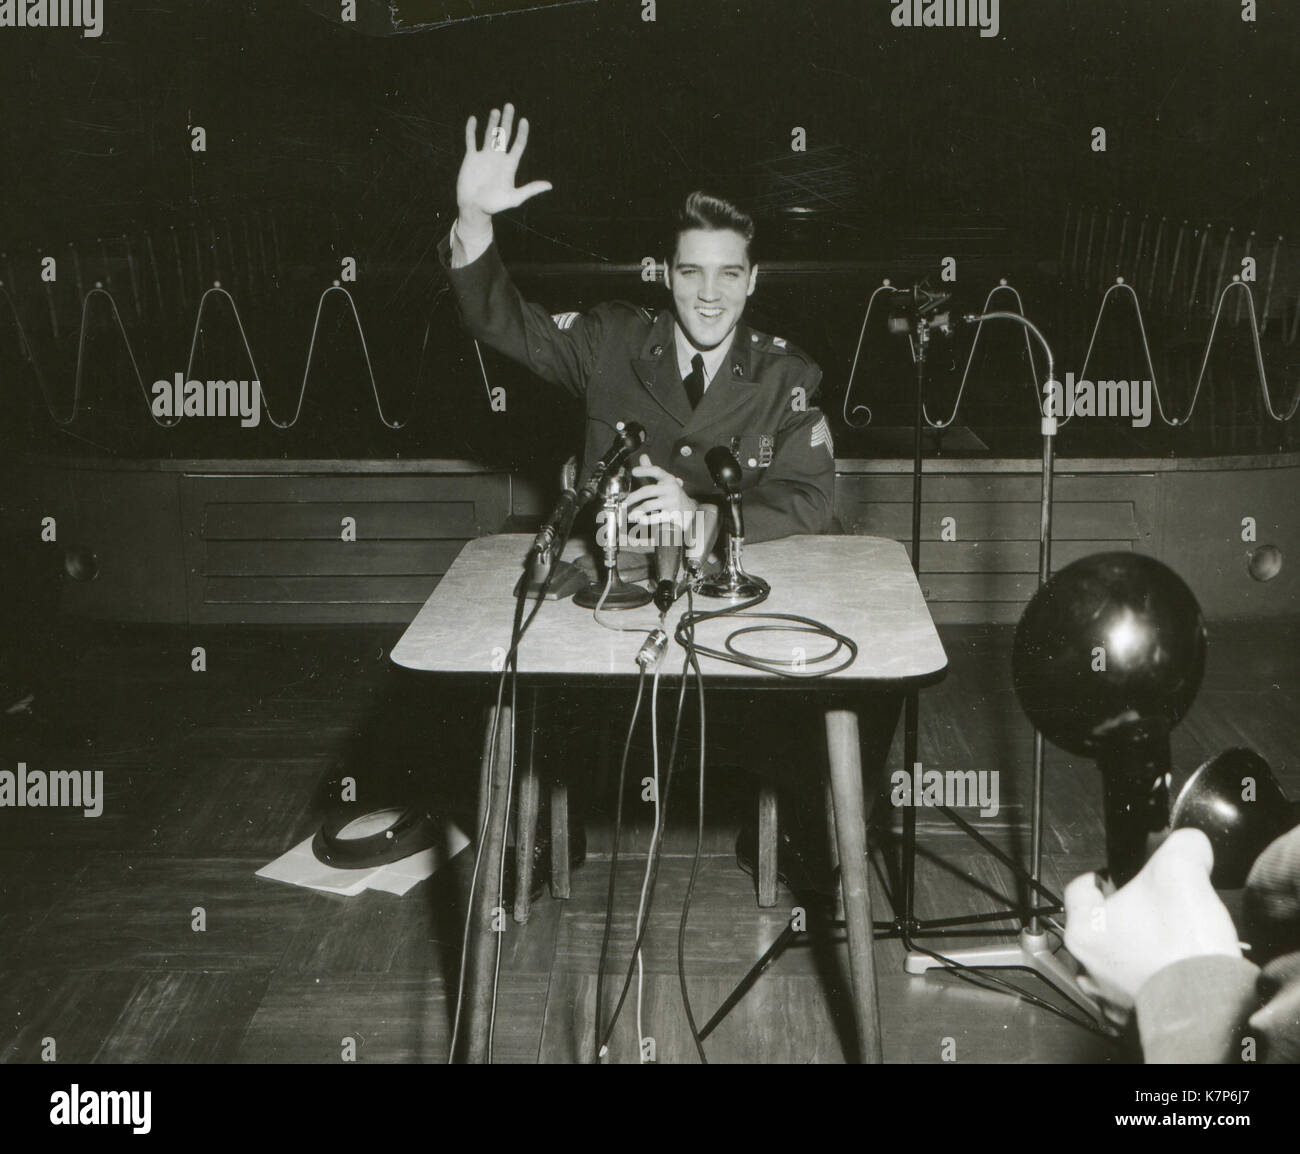 1 March 1960 - Sgt. Elvis A. Presley, 32nd Armored, 3rd Armored Division, answers questions for personnel of the Civilian and military press during the last press conference conducted while he was in Germany. Stock Photo